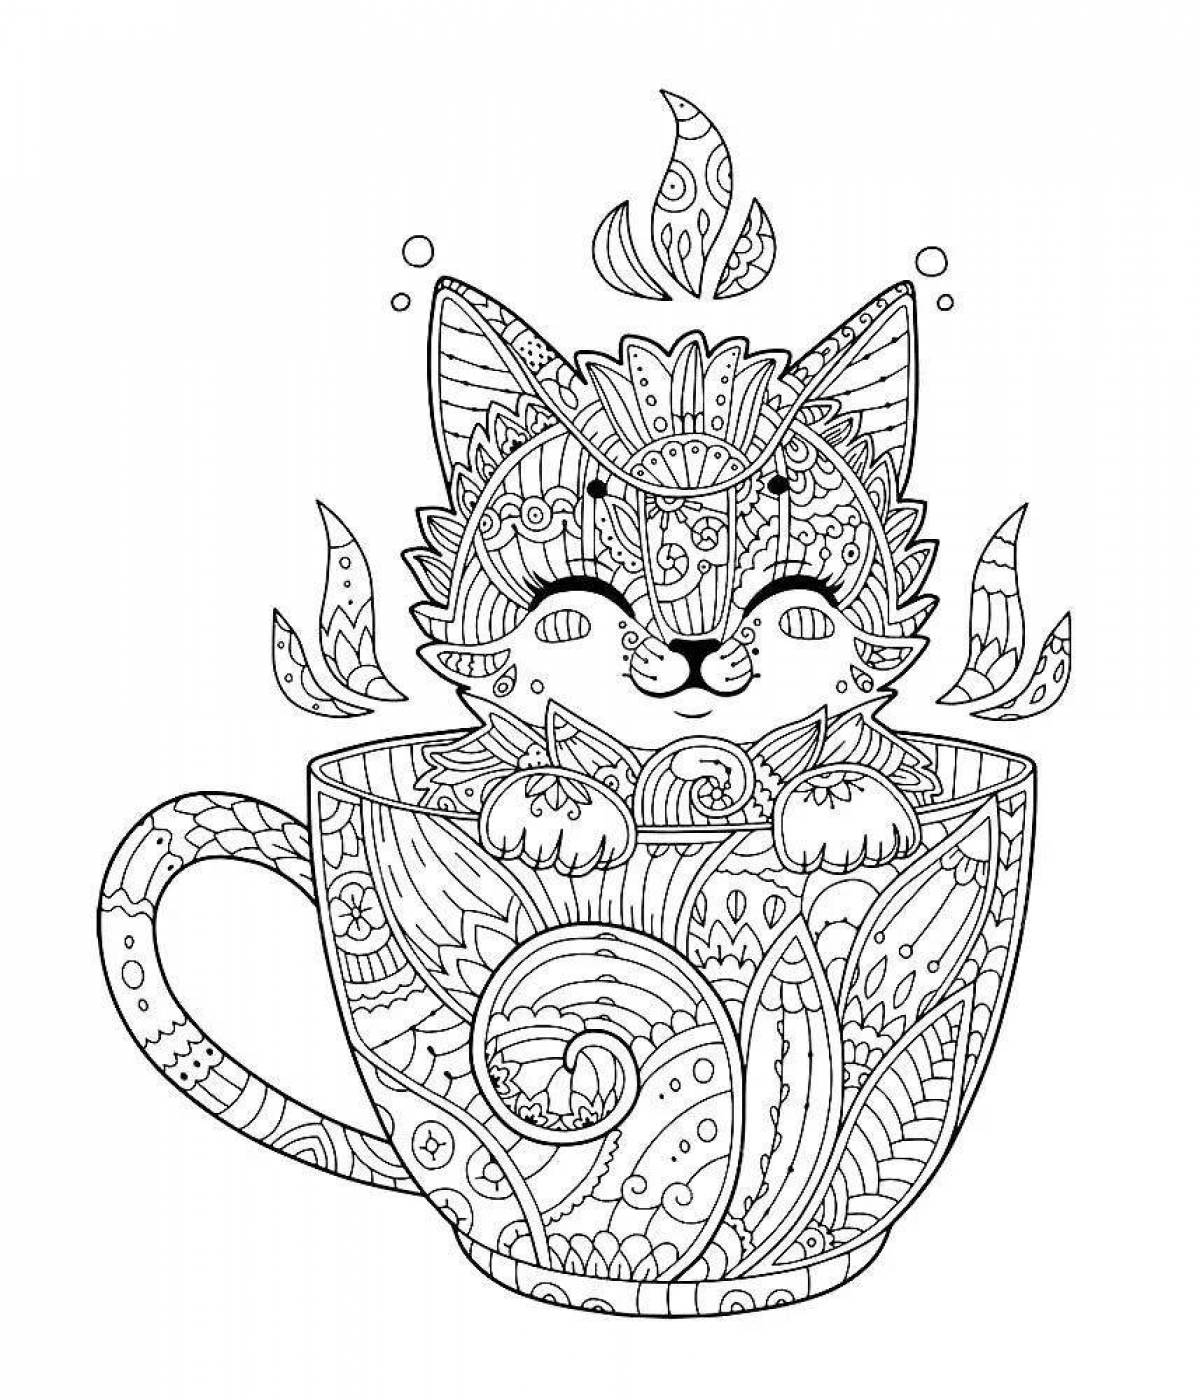 Great anti-stress animal coloring book for girls